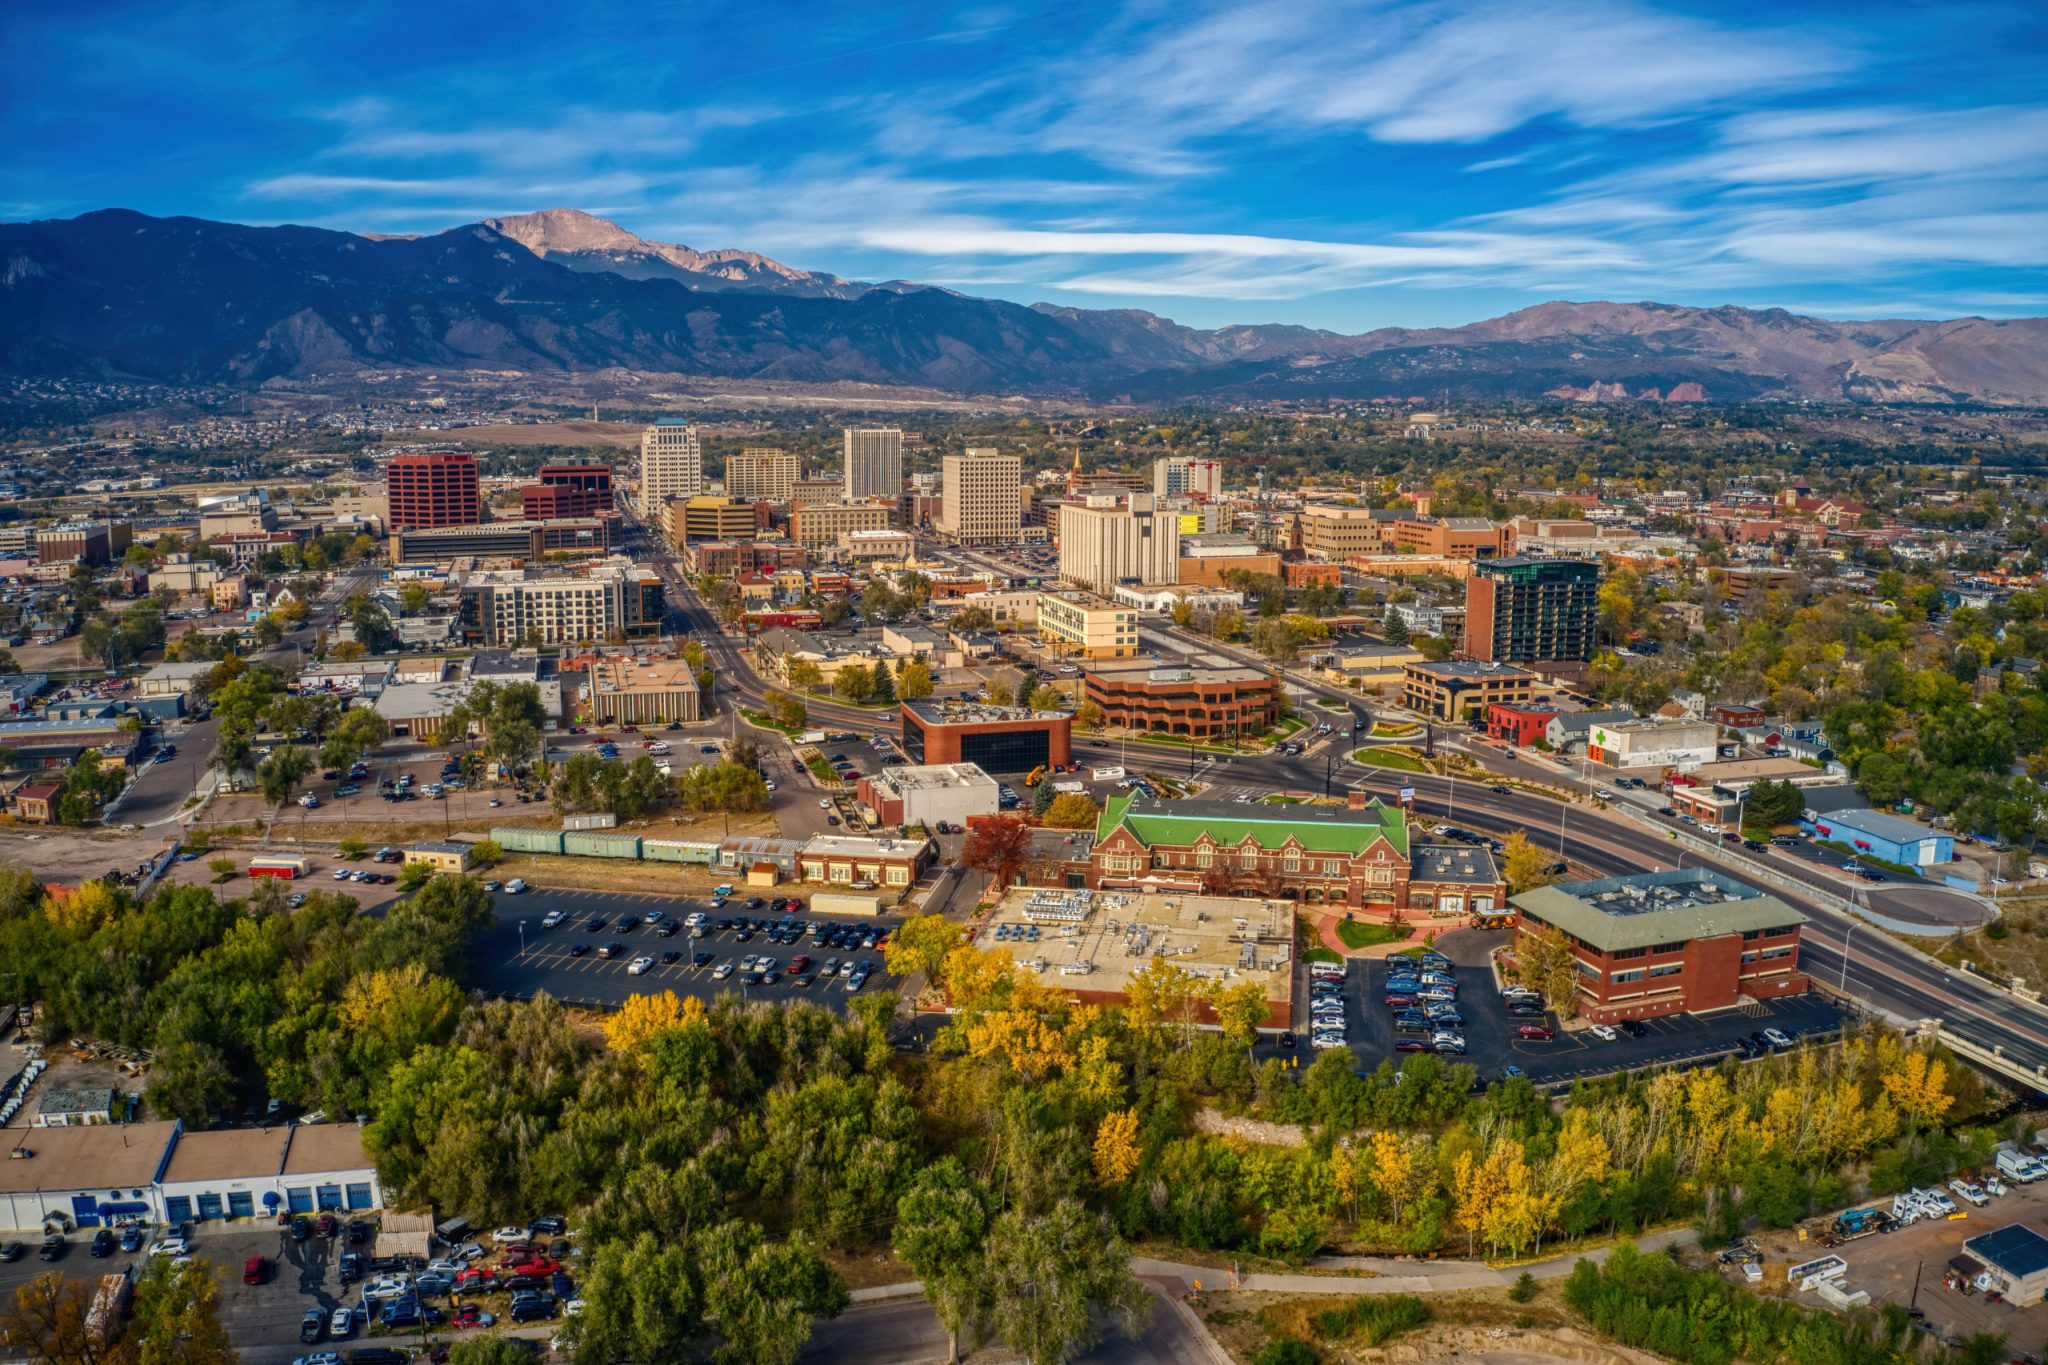 Harner asks (and answers) “What is the essence of Colorado Springs